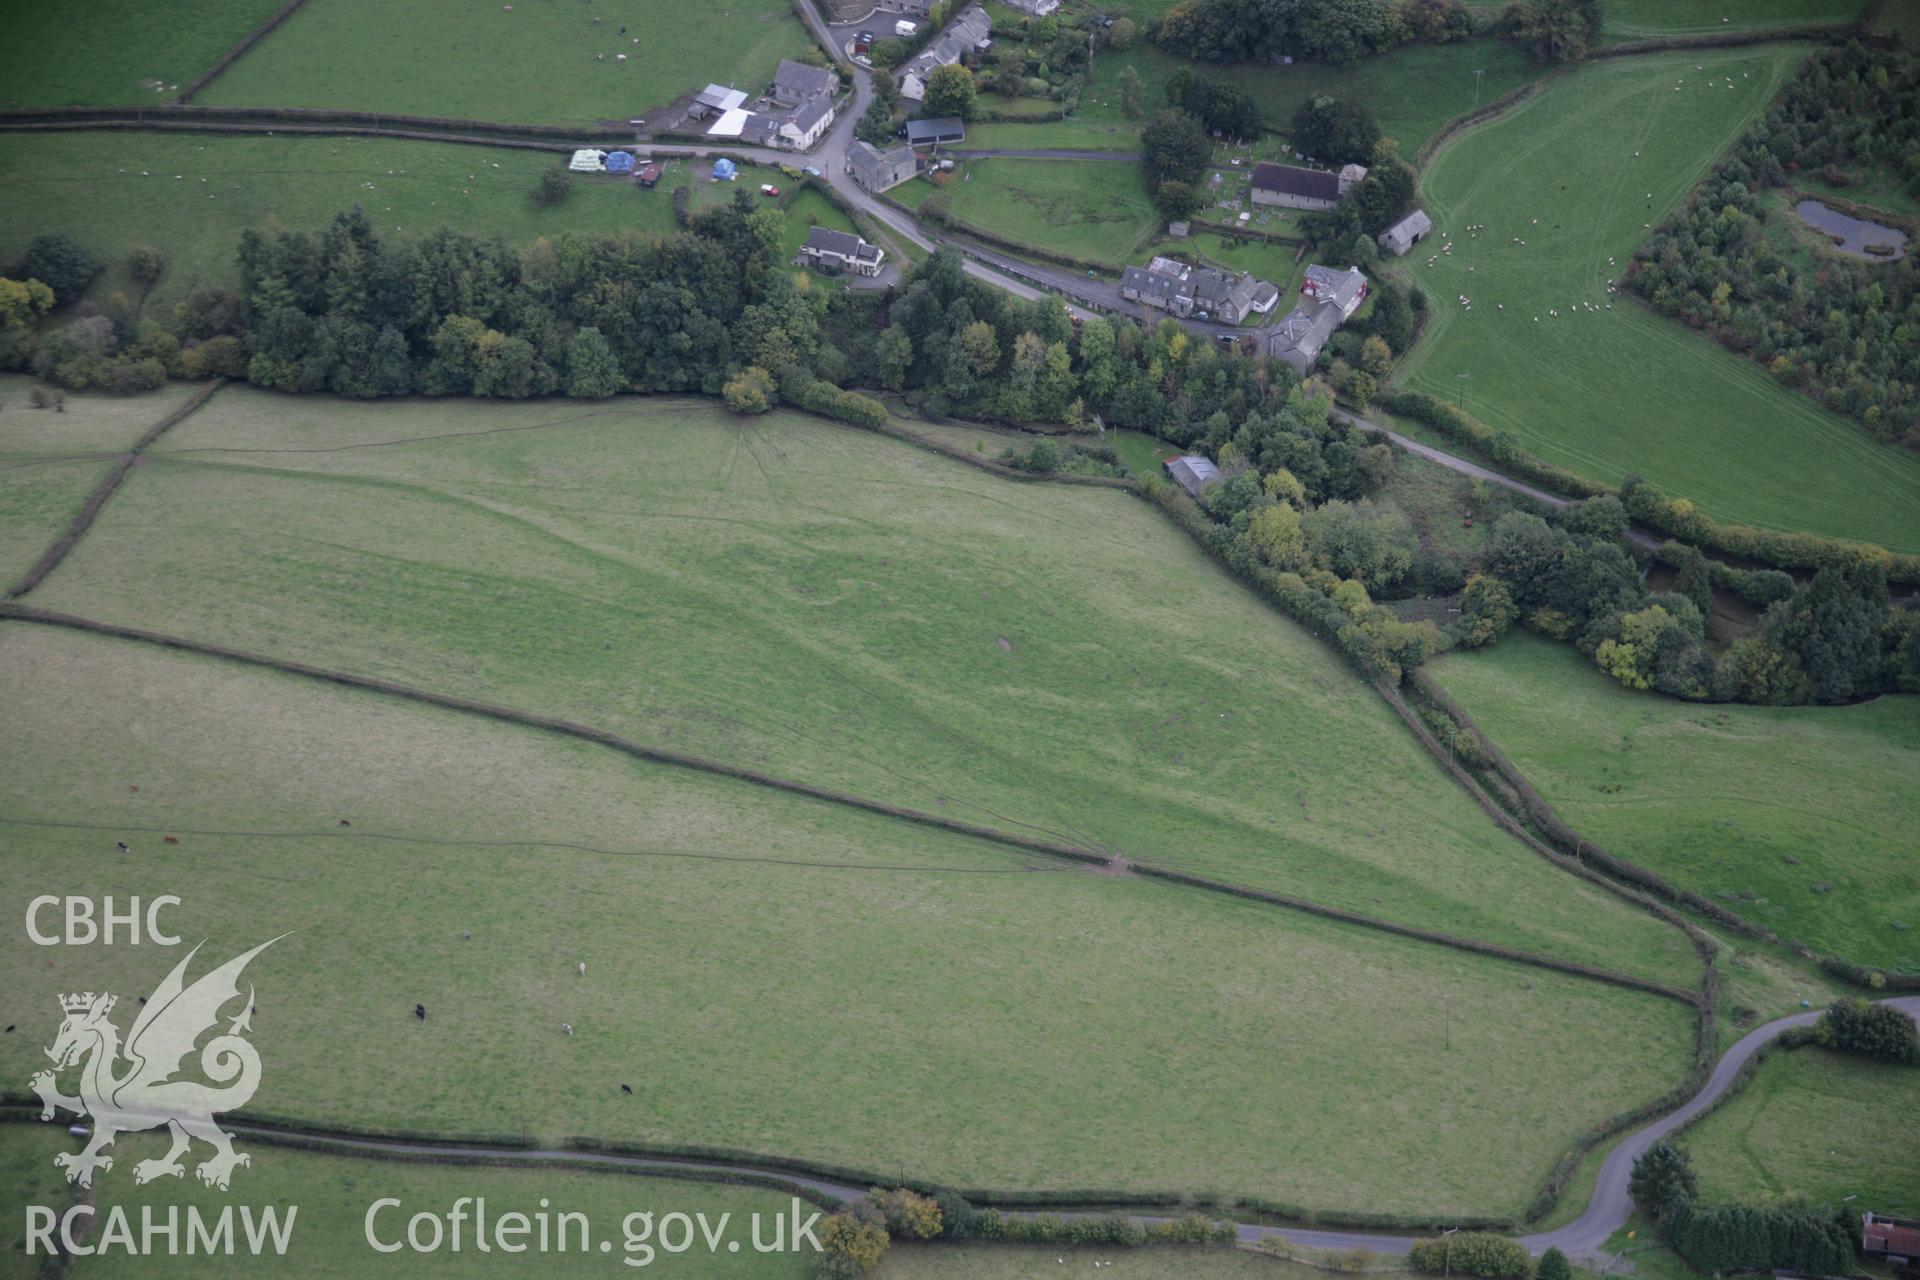 RCAHMW colour oblique aerial photograph of Gwenddwr Deserted Village. Taken on 13 October 2005 by Toby Driver